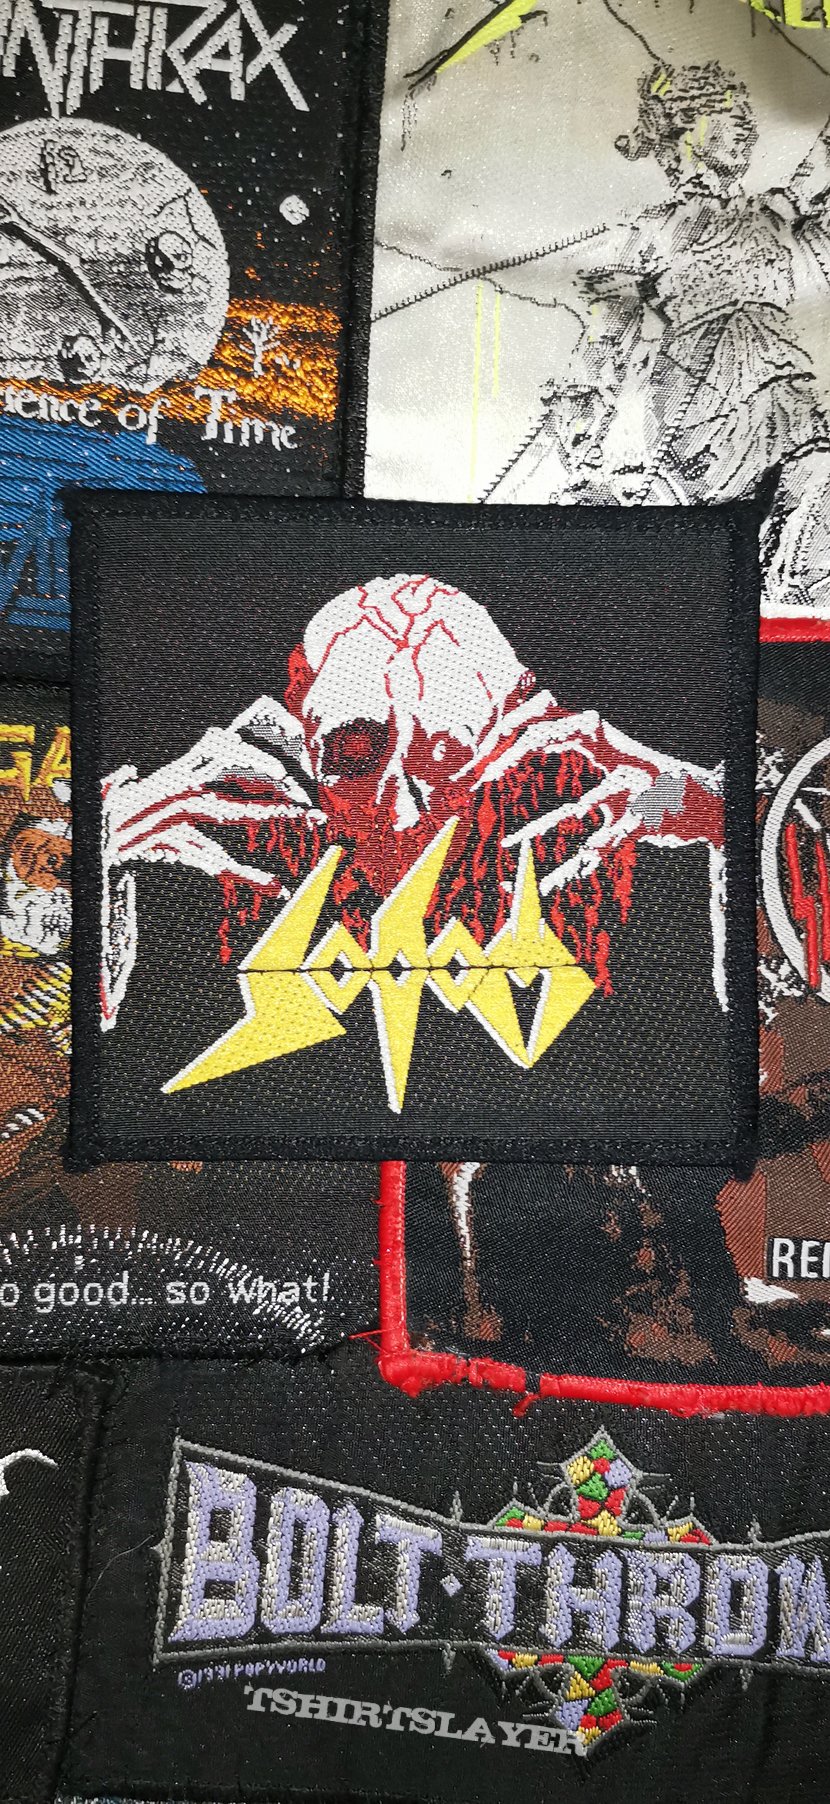 Sodom Obsessed by cruelty patch